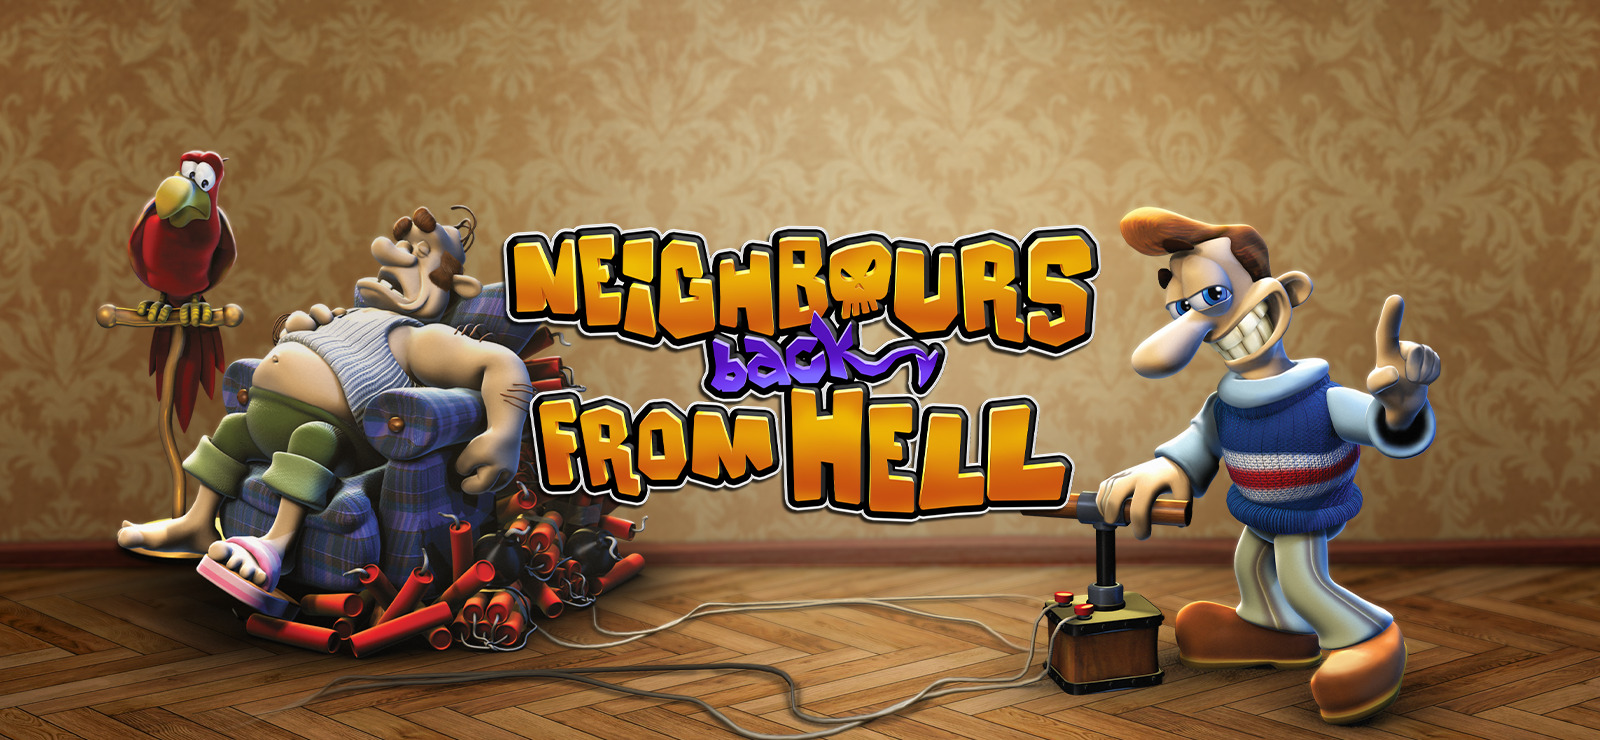 watch neighbors from hell